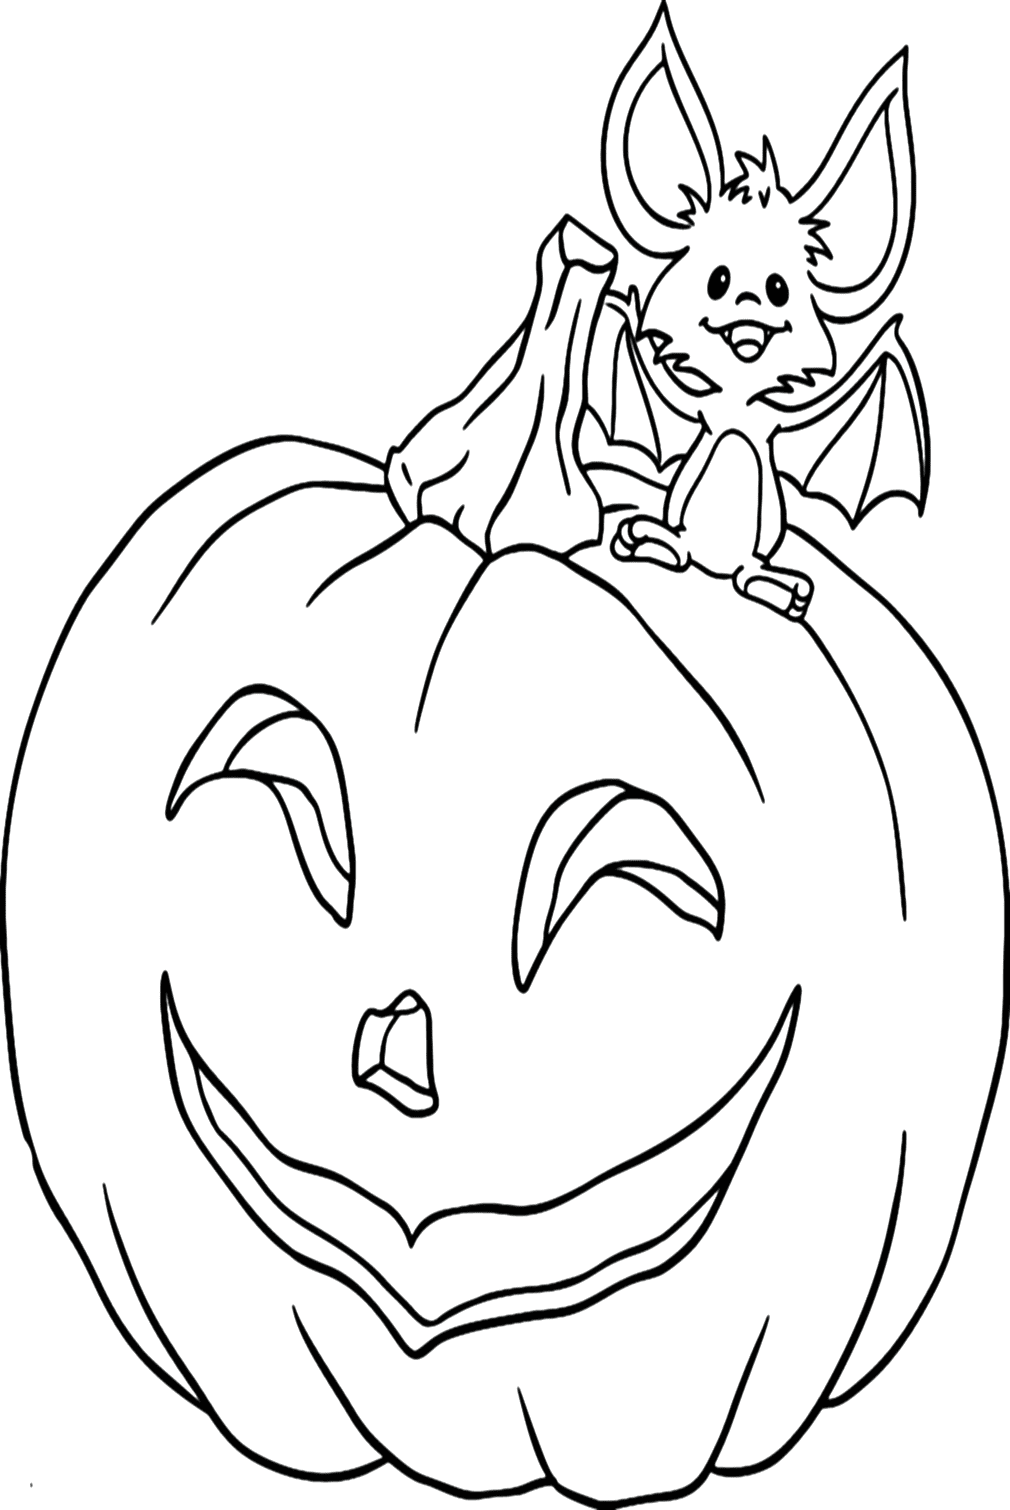 Vampire Bat Coloring Pages from Bat